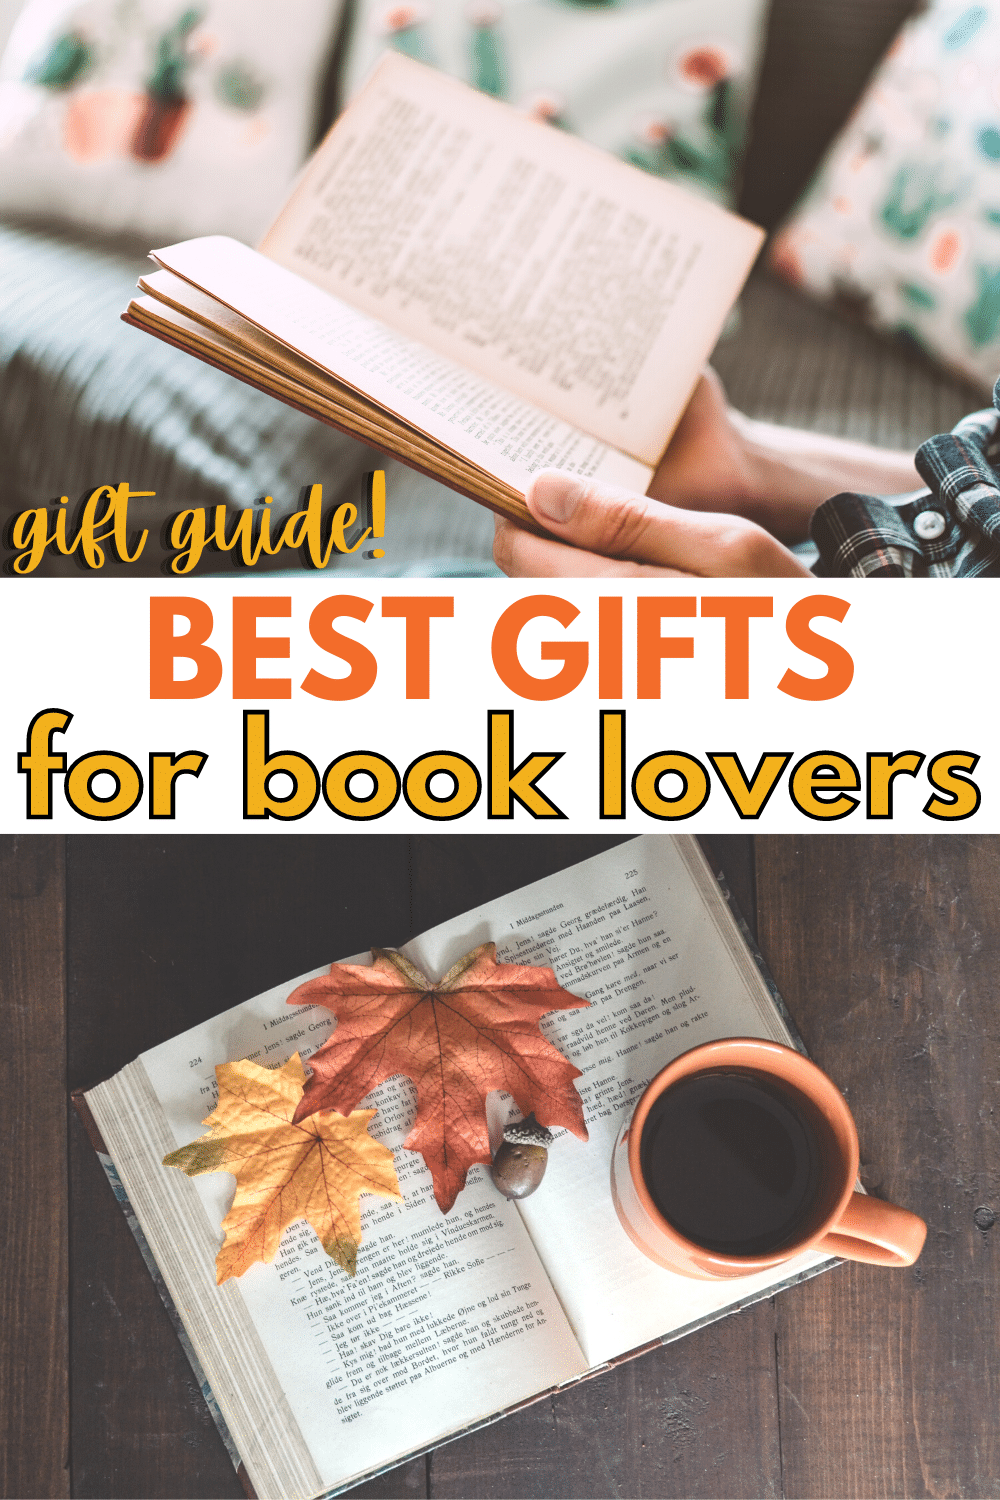 There are lots of great gifts for book lovers besides books. There are some great ideas in this best gifts for book lovers guide. #giftguide #giftideas #booklovers via @wondermomwannab